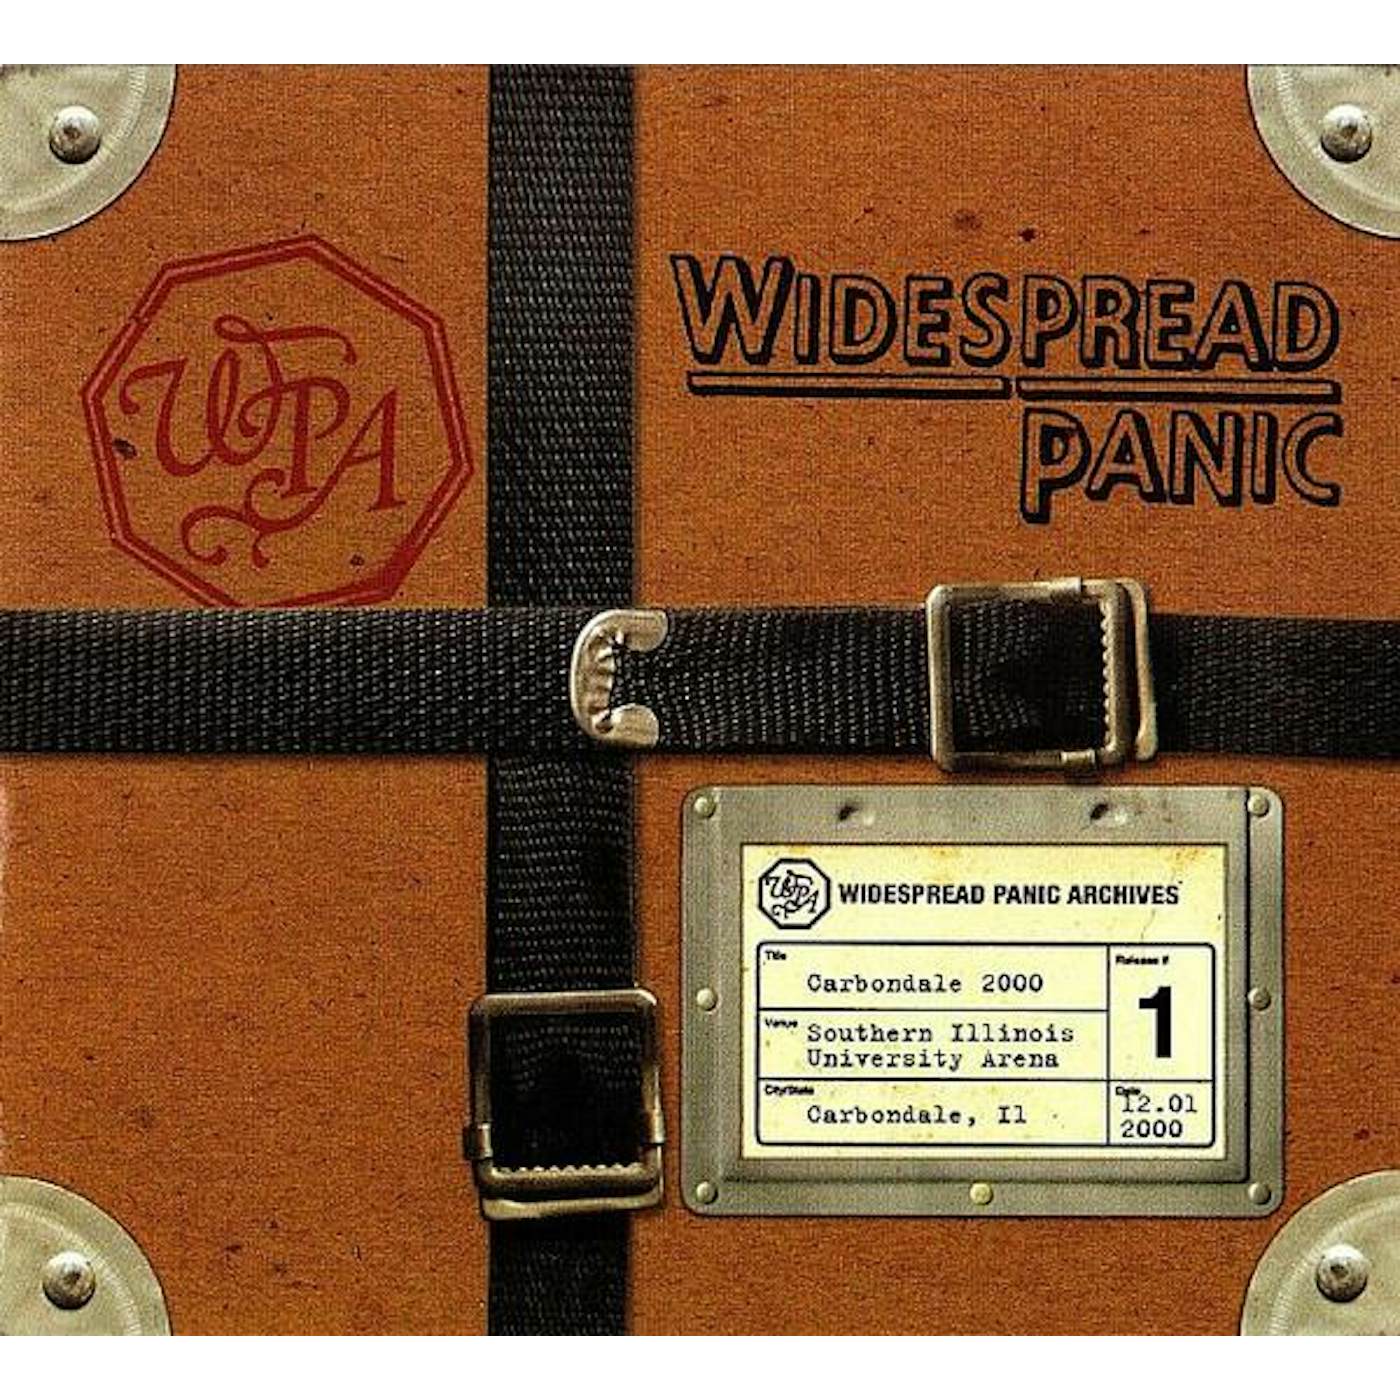 Widespread Panic CARBONDALE 2000 CD